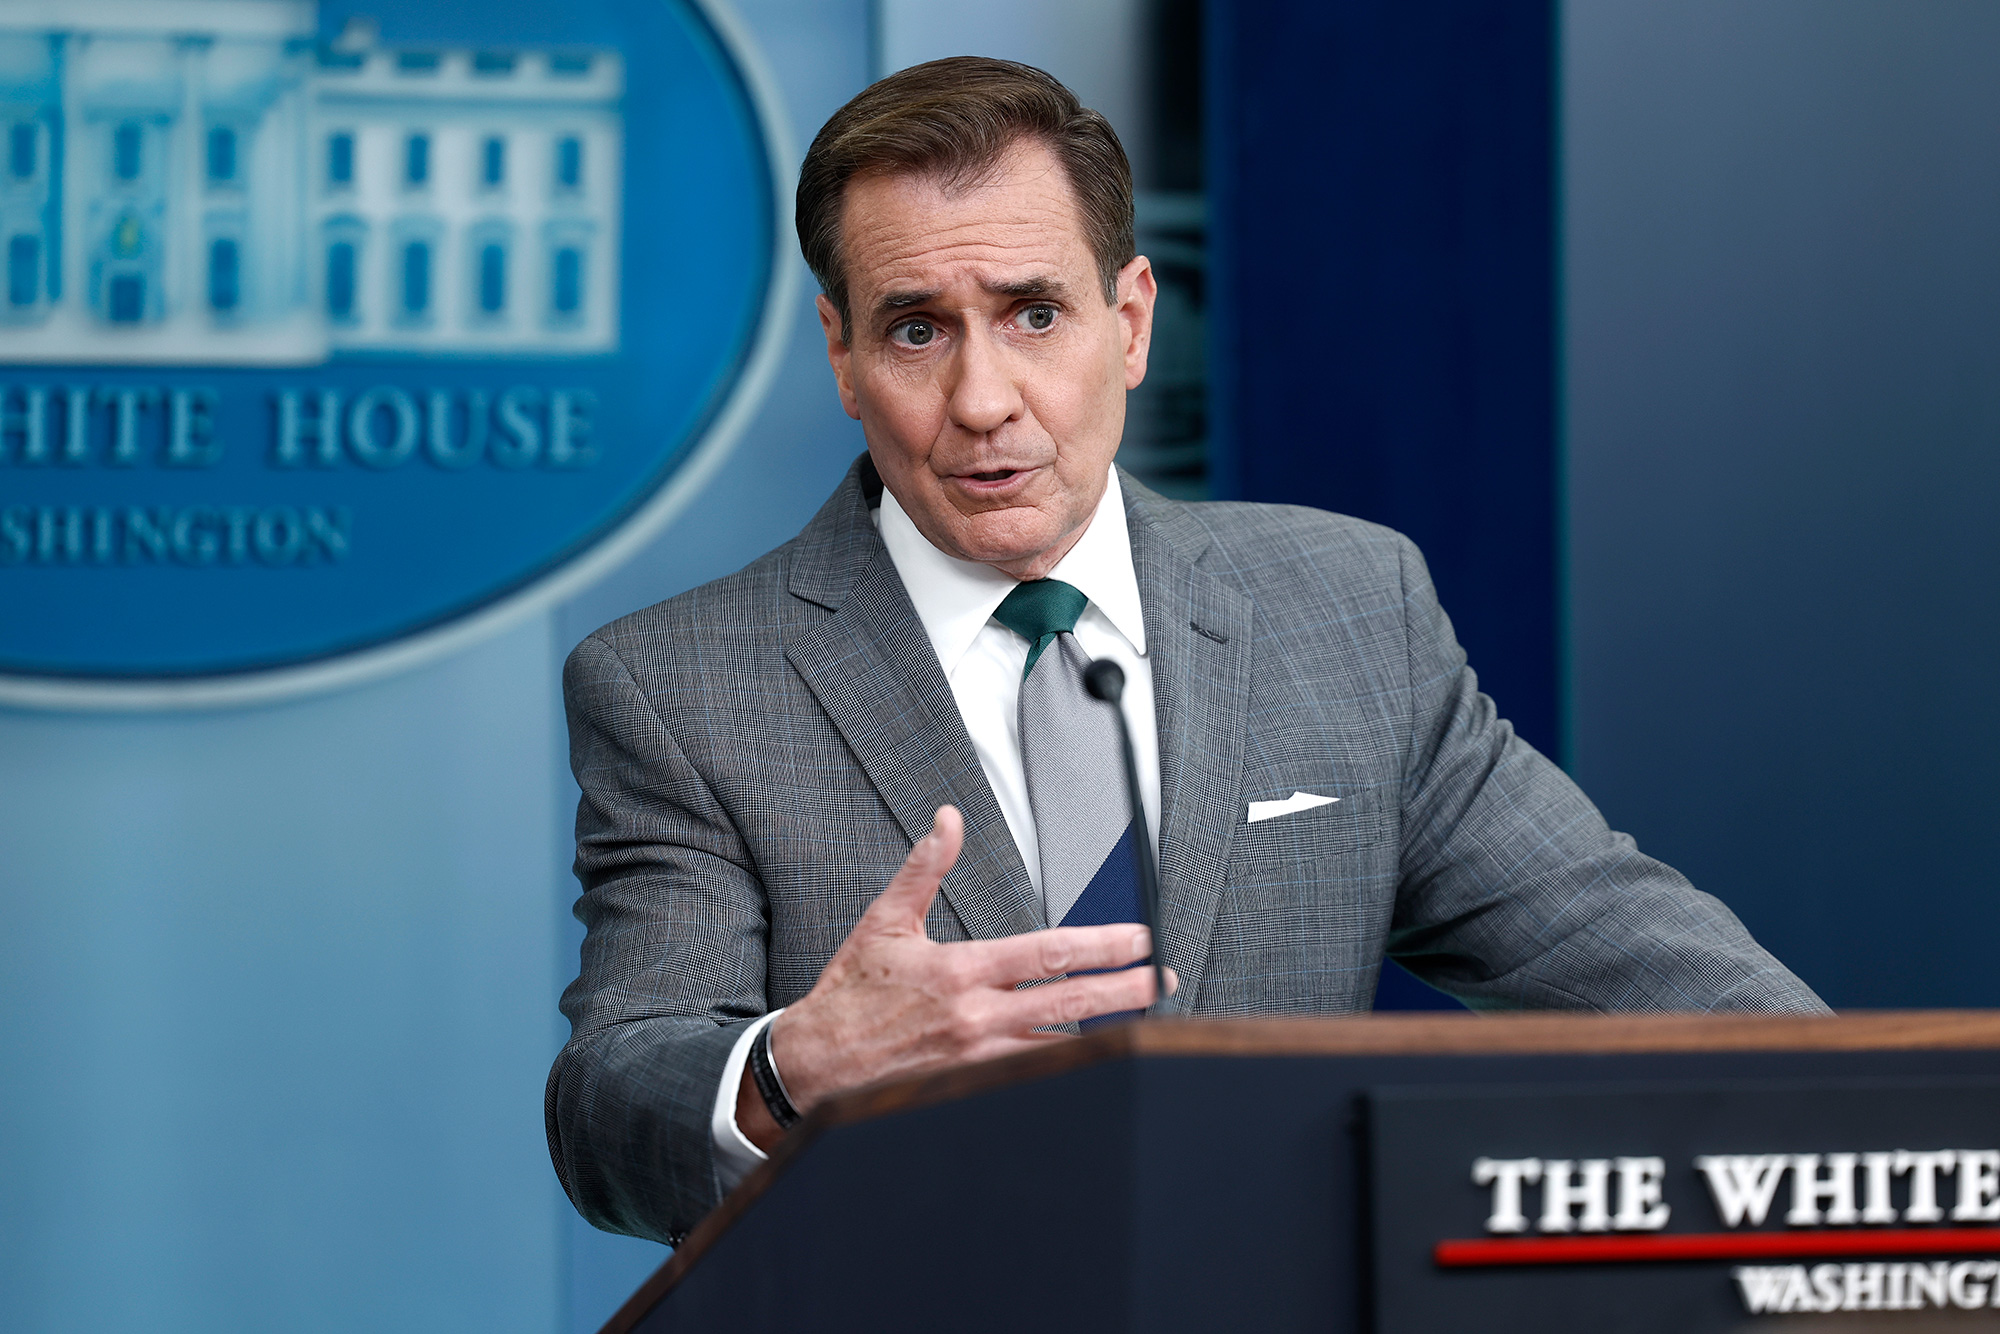 National Security Council Coordinator for Strategic Communications John Kirby speaks at the White House in Washington DC on April 15.